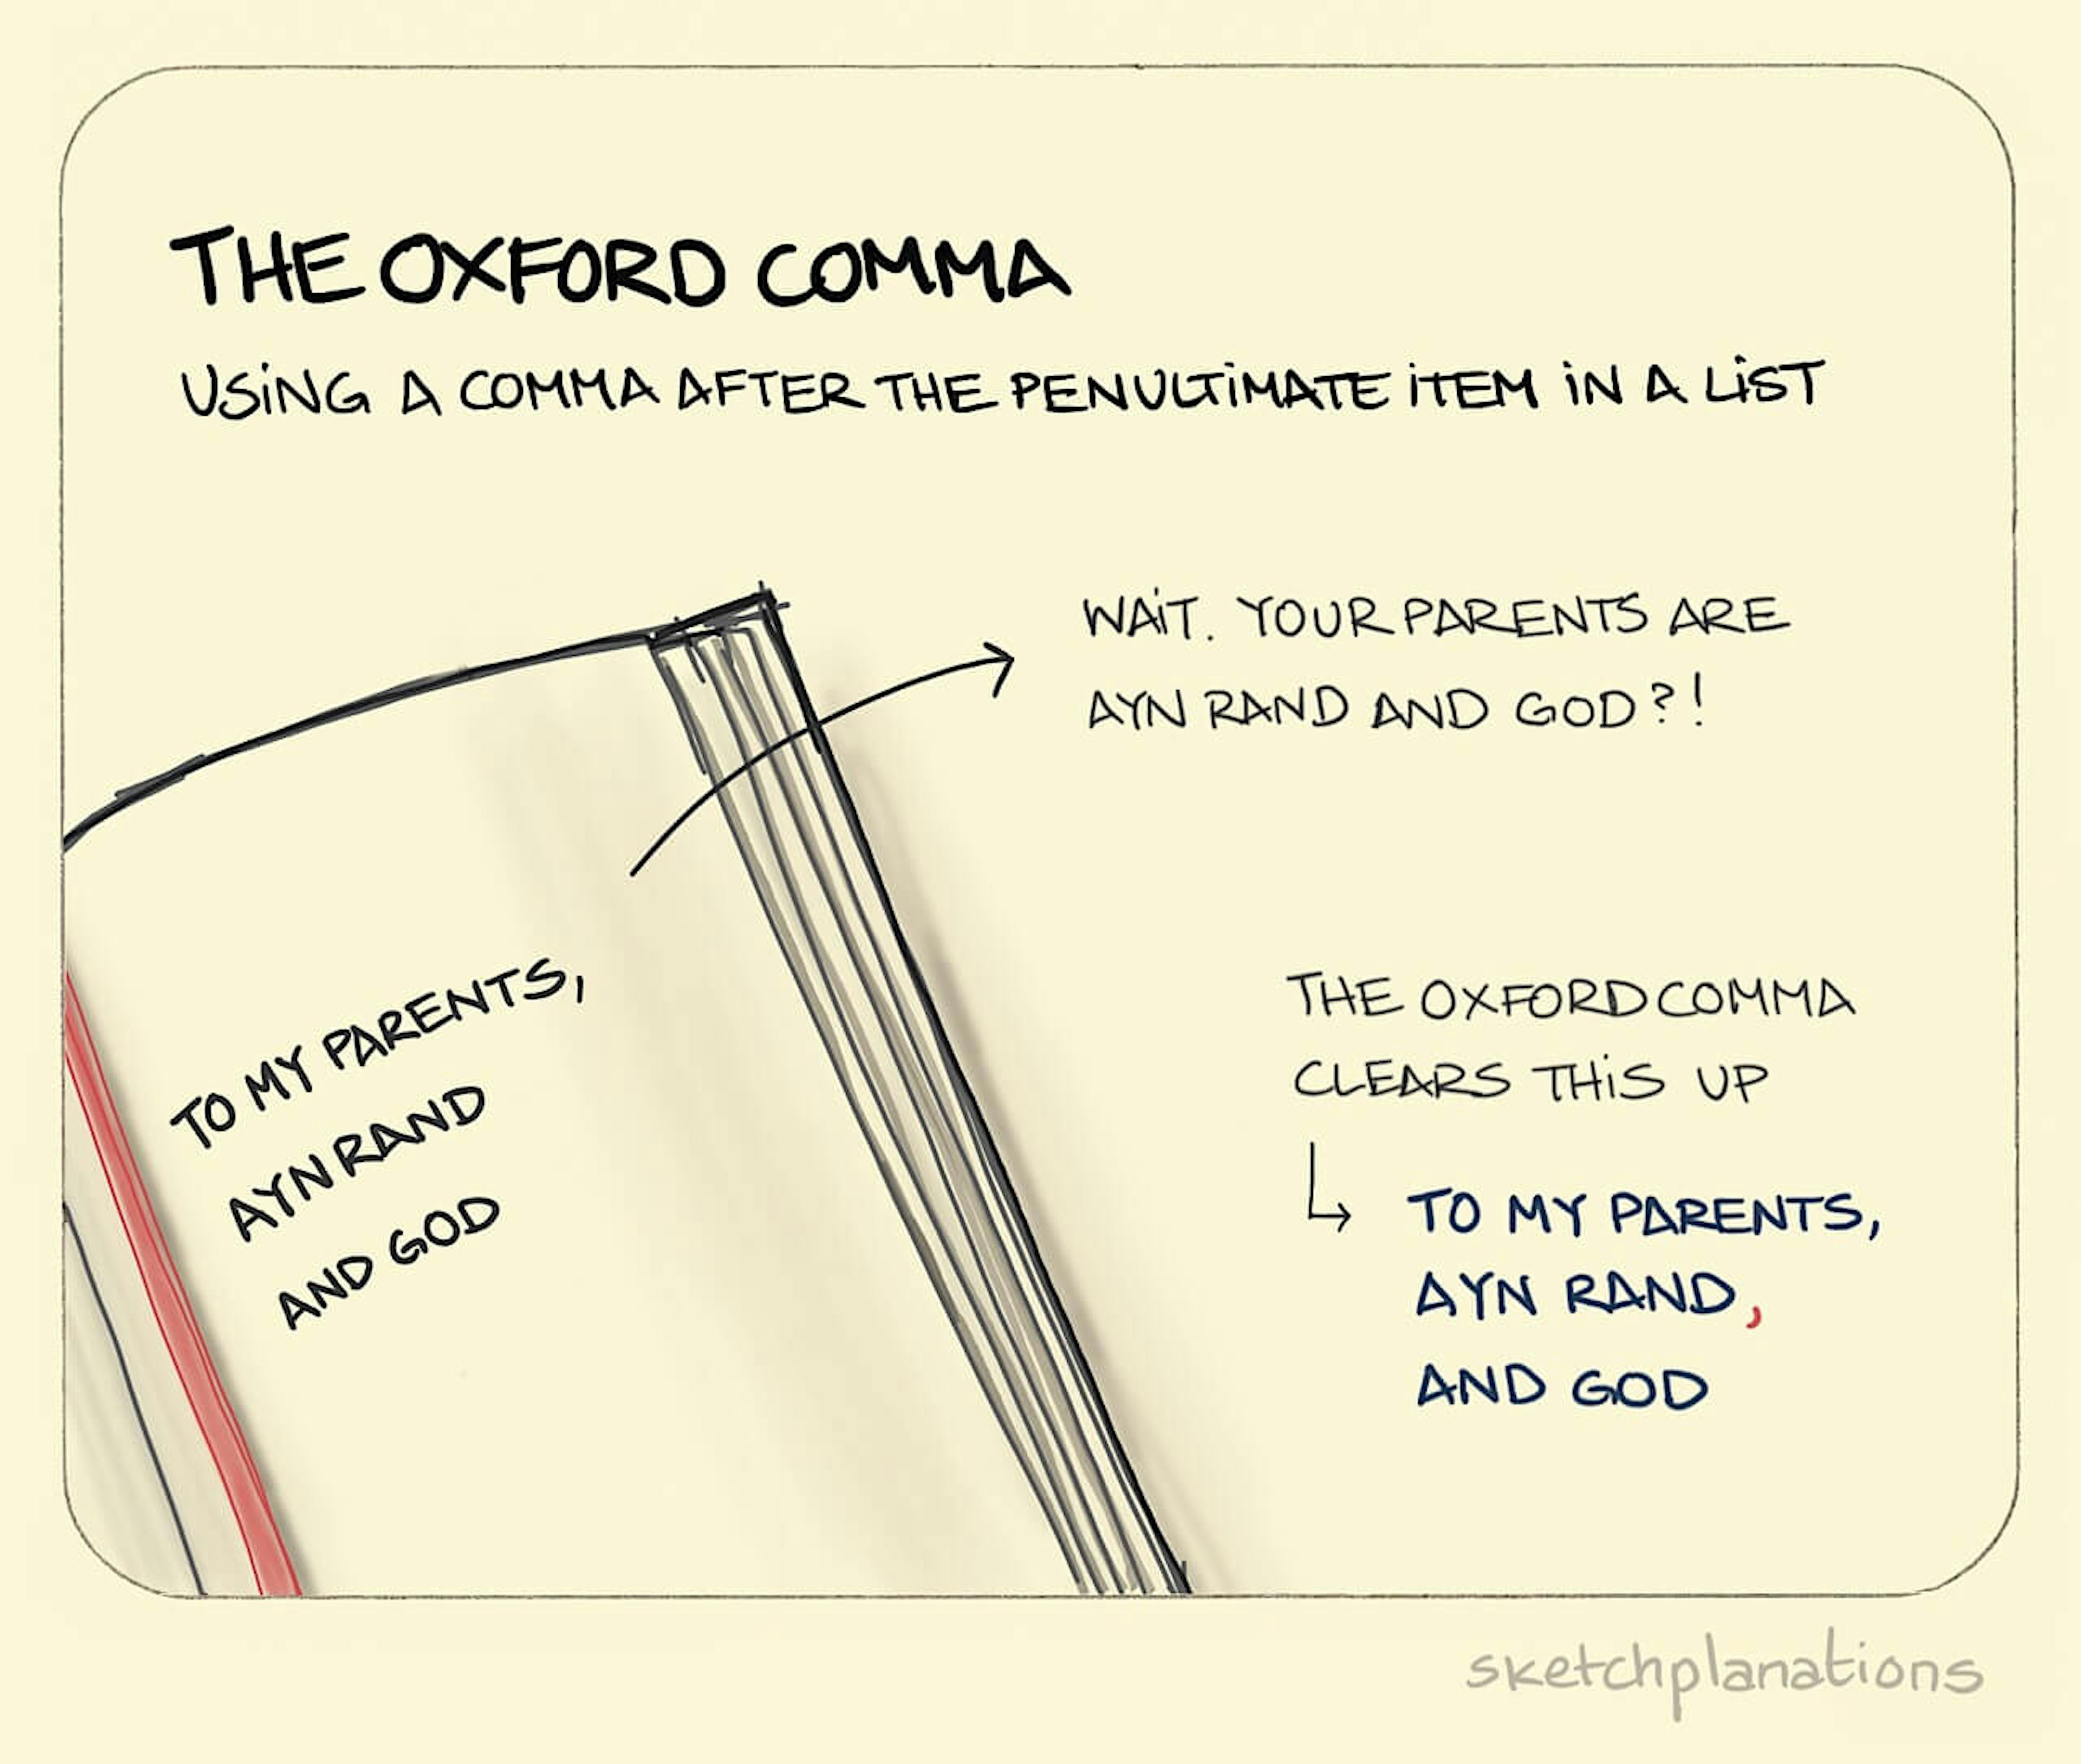 The Oxford Comma illustration: in the acknowledgements at the beginning of a book, the oxford comma, used after the penultimate item in a list, clears up any confusion as to whether God is a parent of the author. 